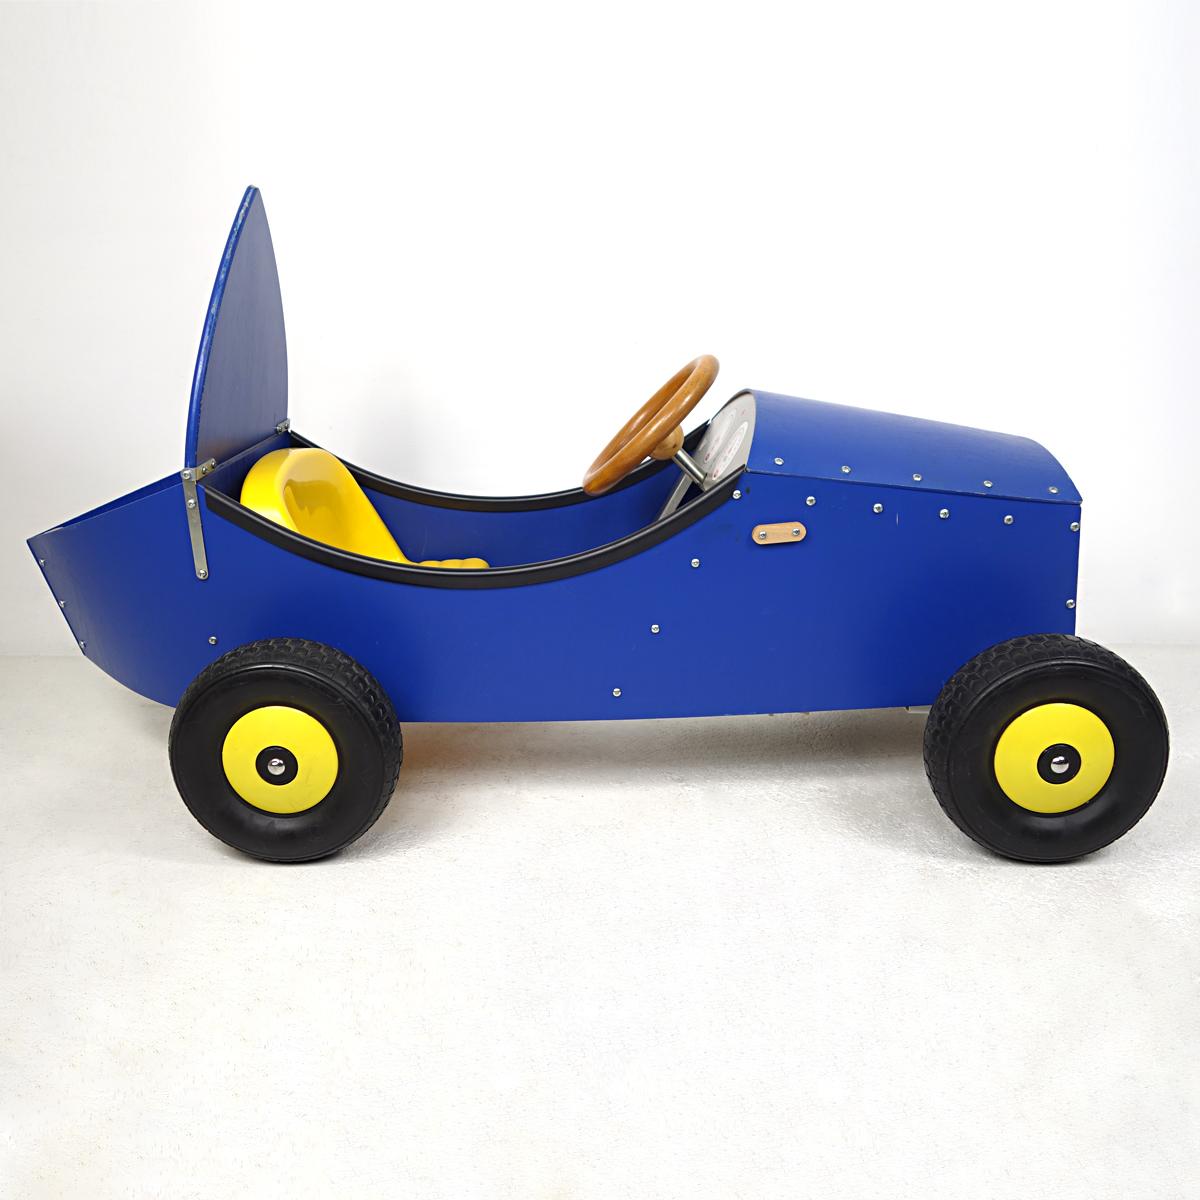 This pedal car was designed in 1998 by the world famous designer Philippe Starck for French retail group La Redoute. It was part of the Good Goods collection. 
The pedal car was produced in a limited edition of 500 units.